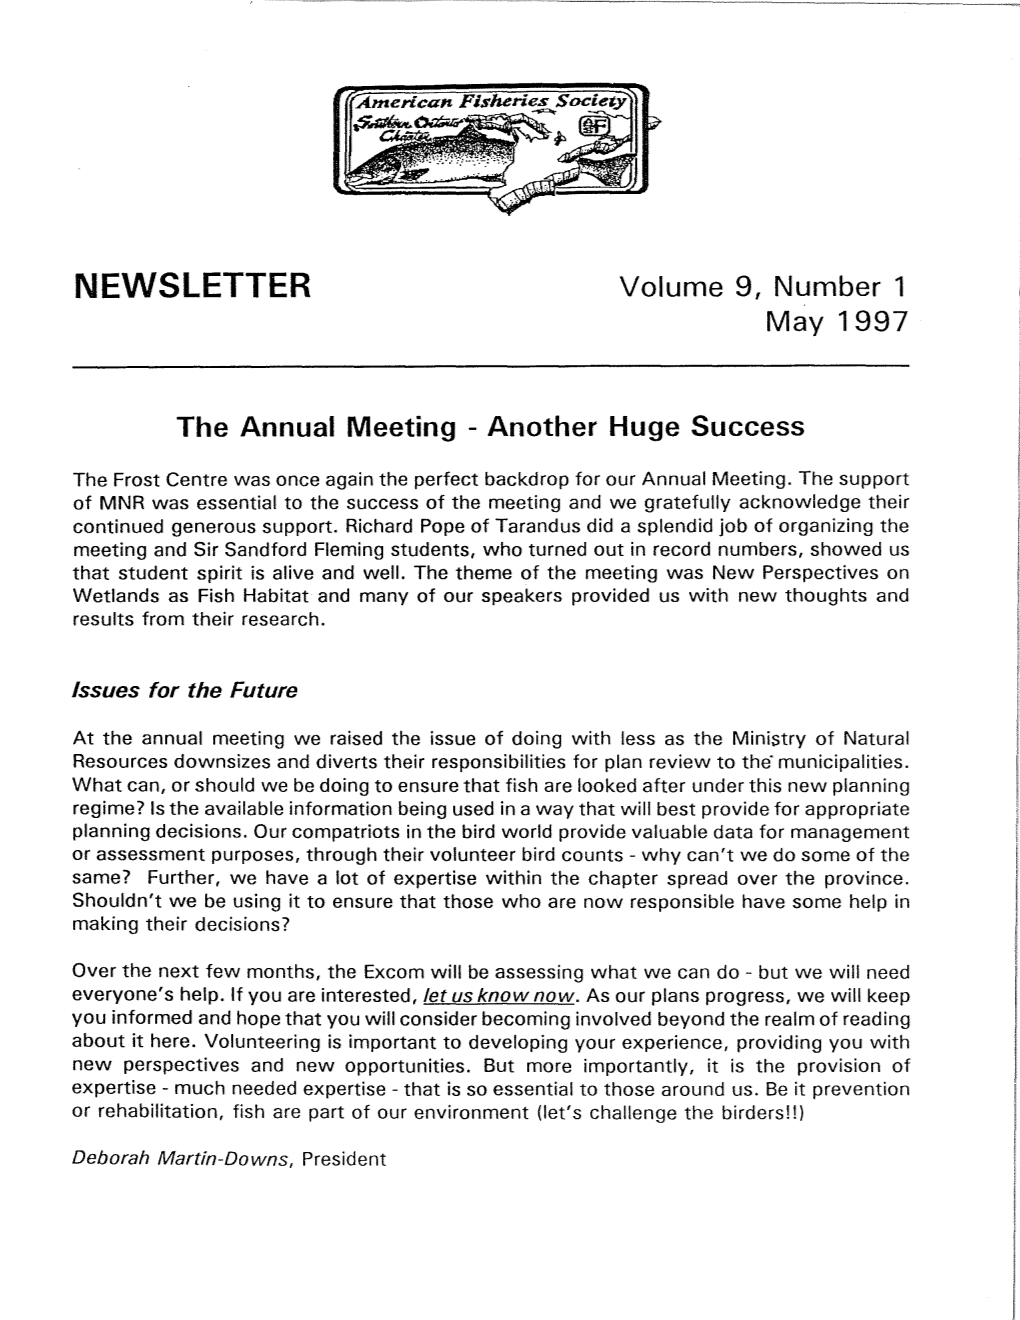 NEWSLETTER Volume 9, Number 1 May 1997